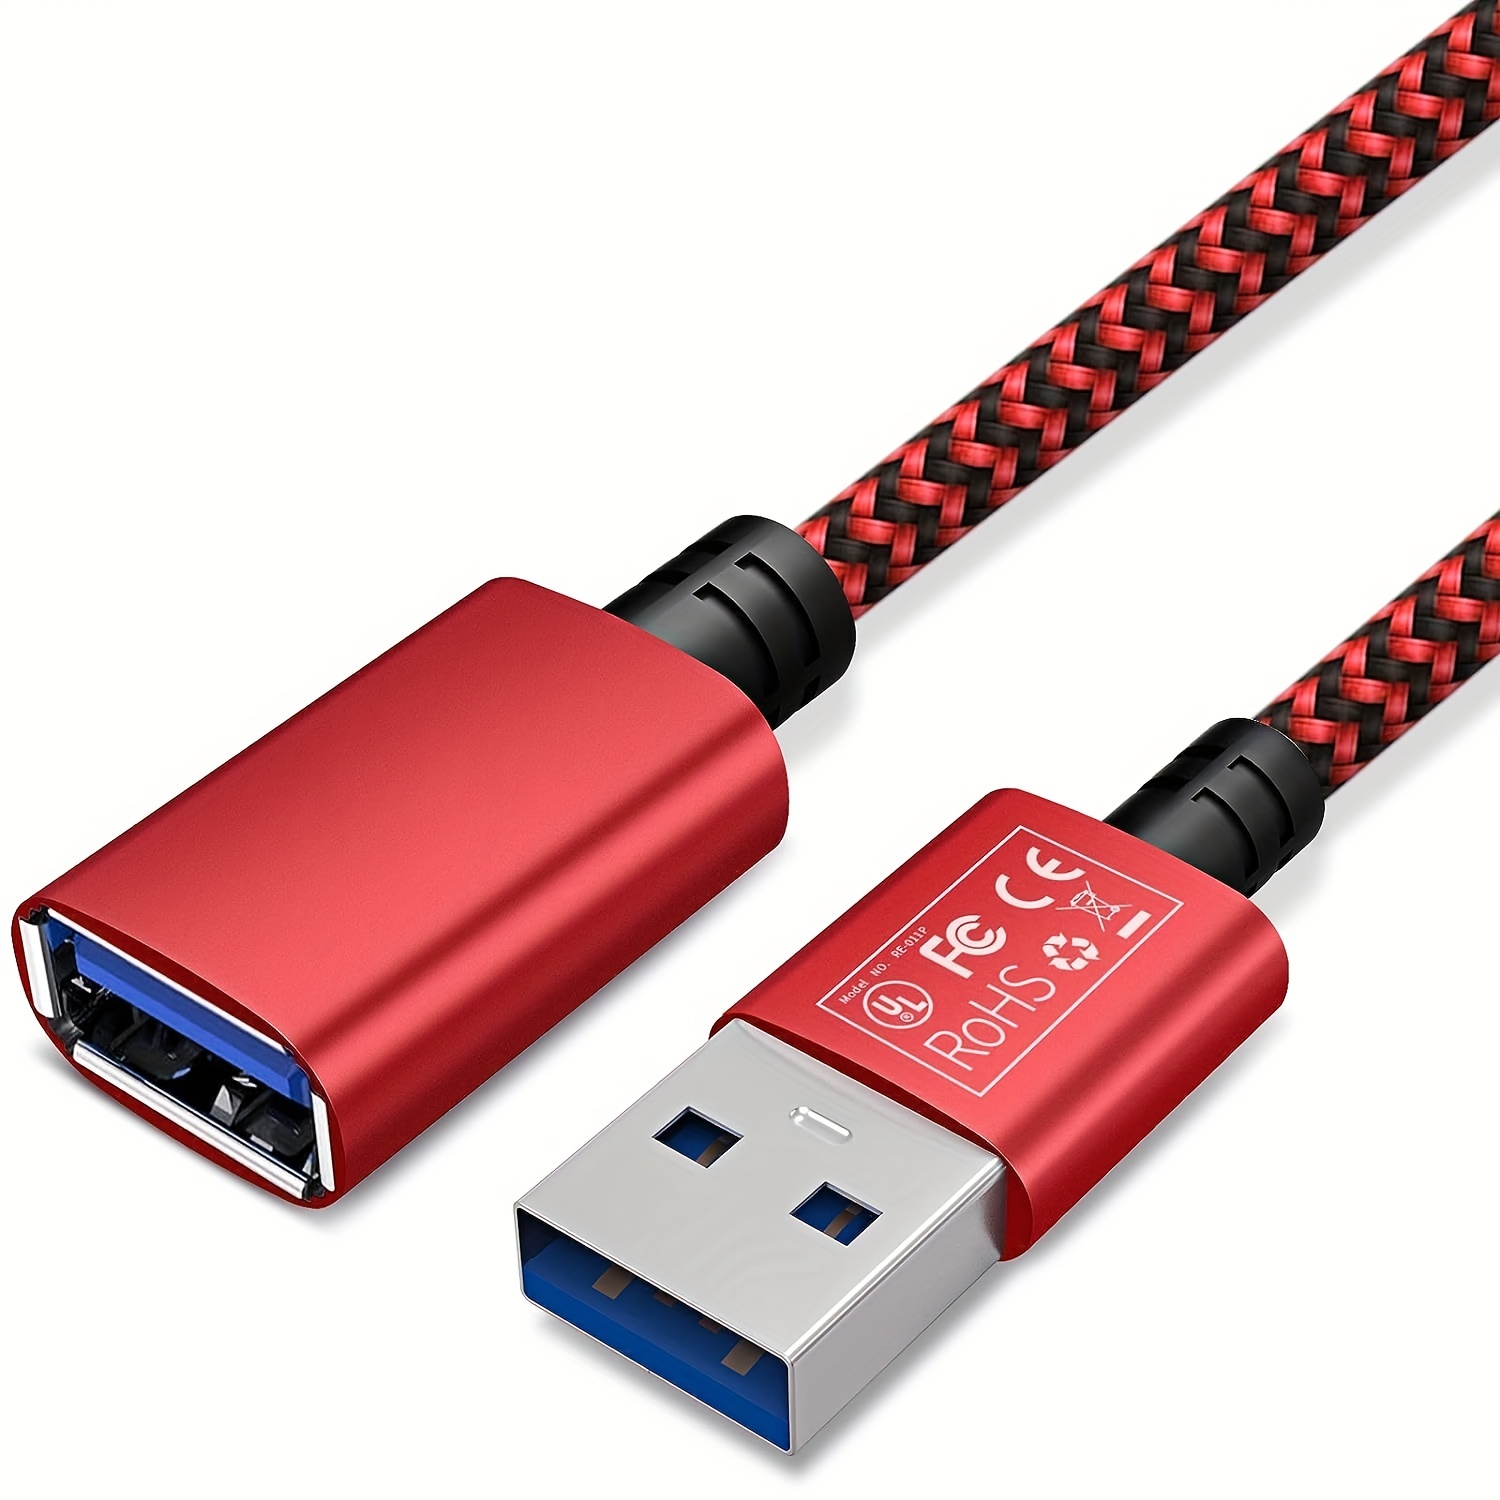 3m USB 3.0 Male to Female Extension Cord Nylon Braided 5Gbps Data